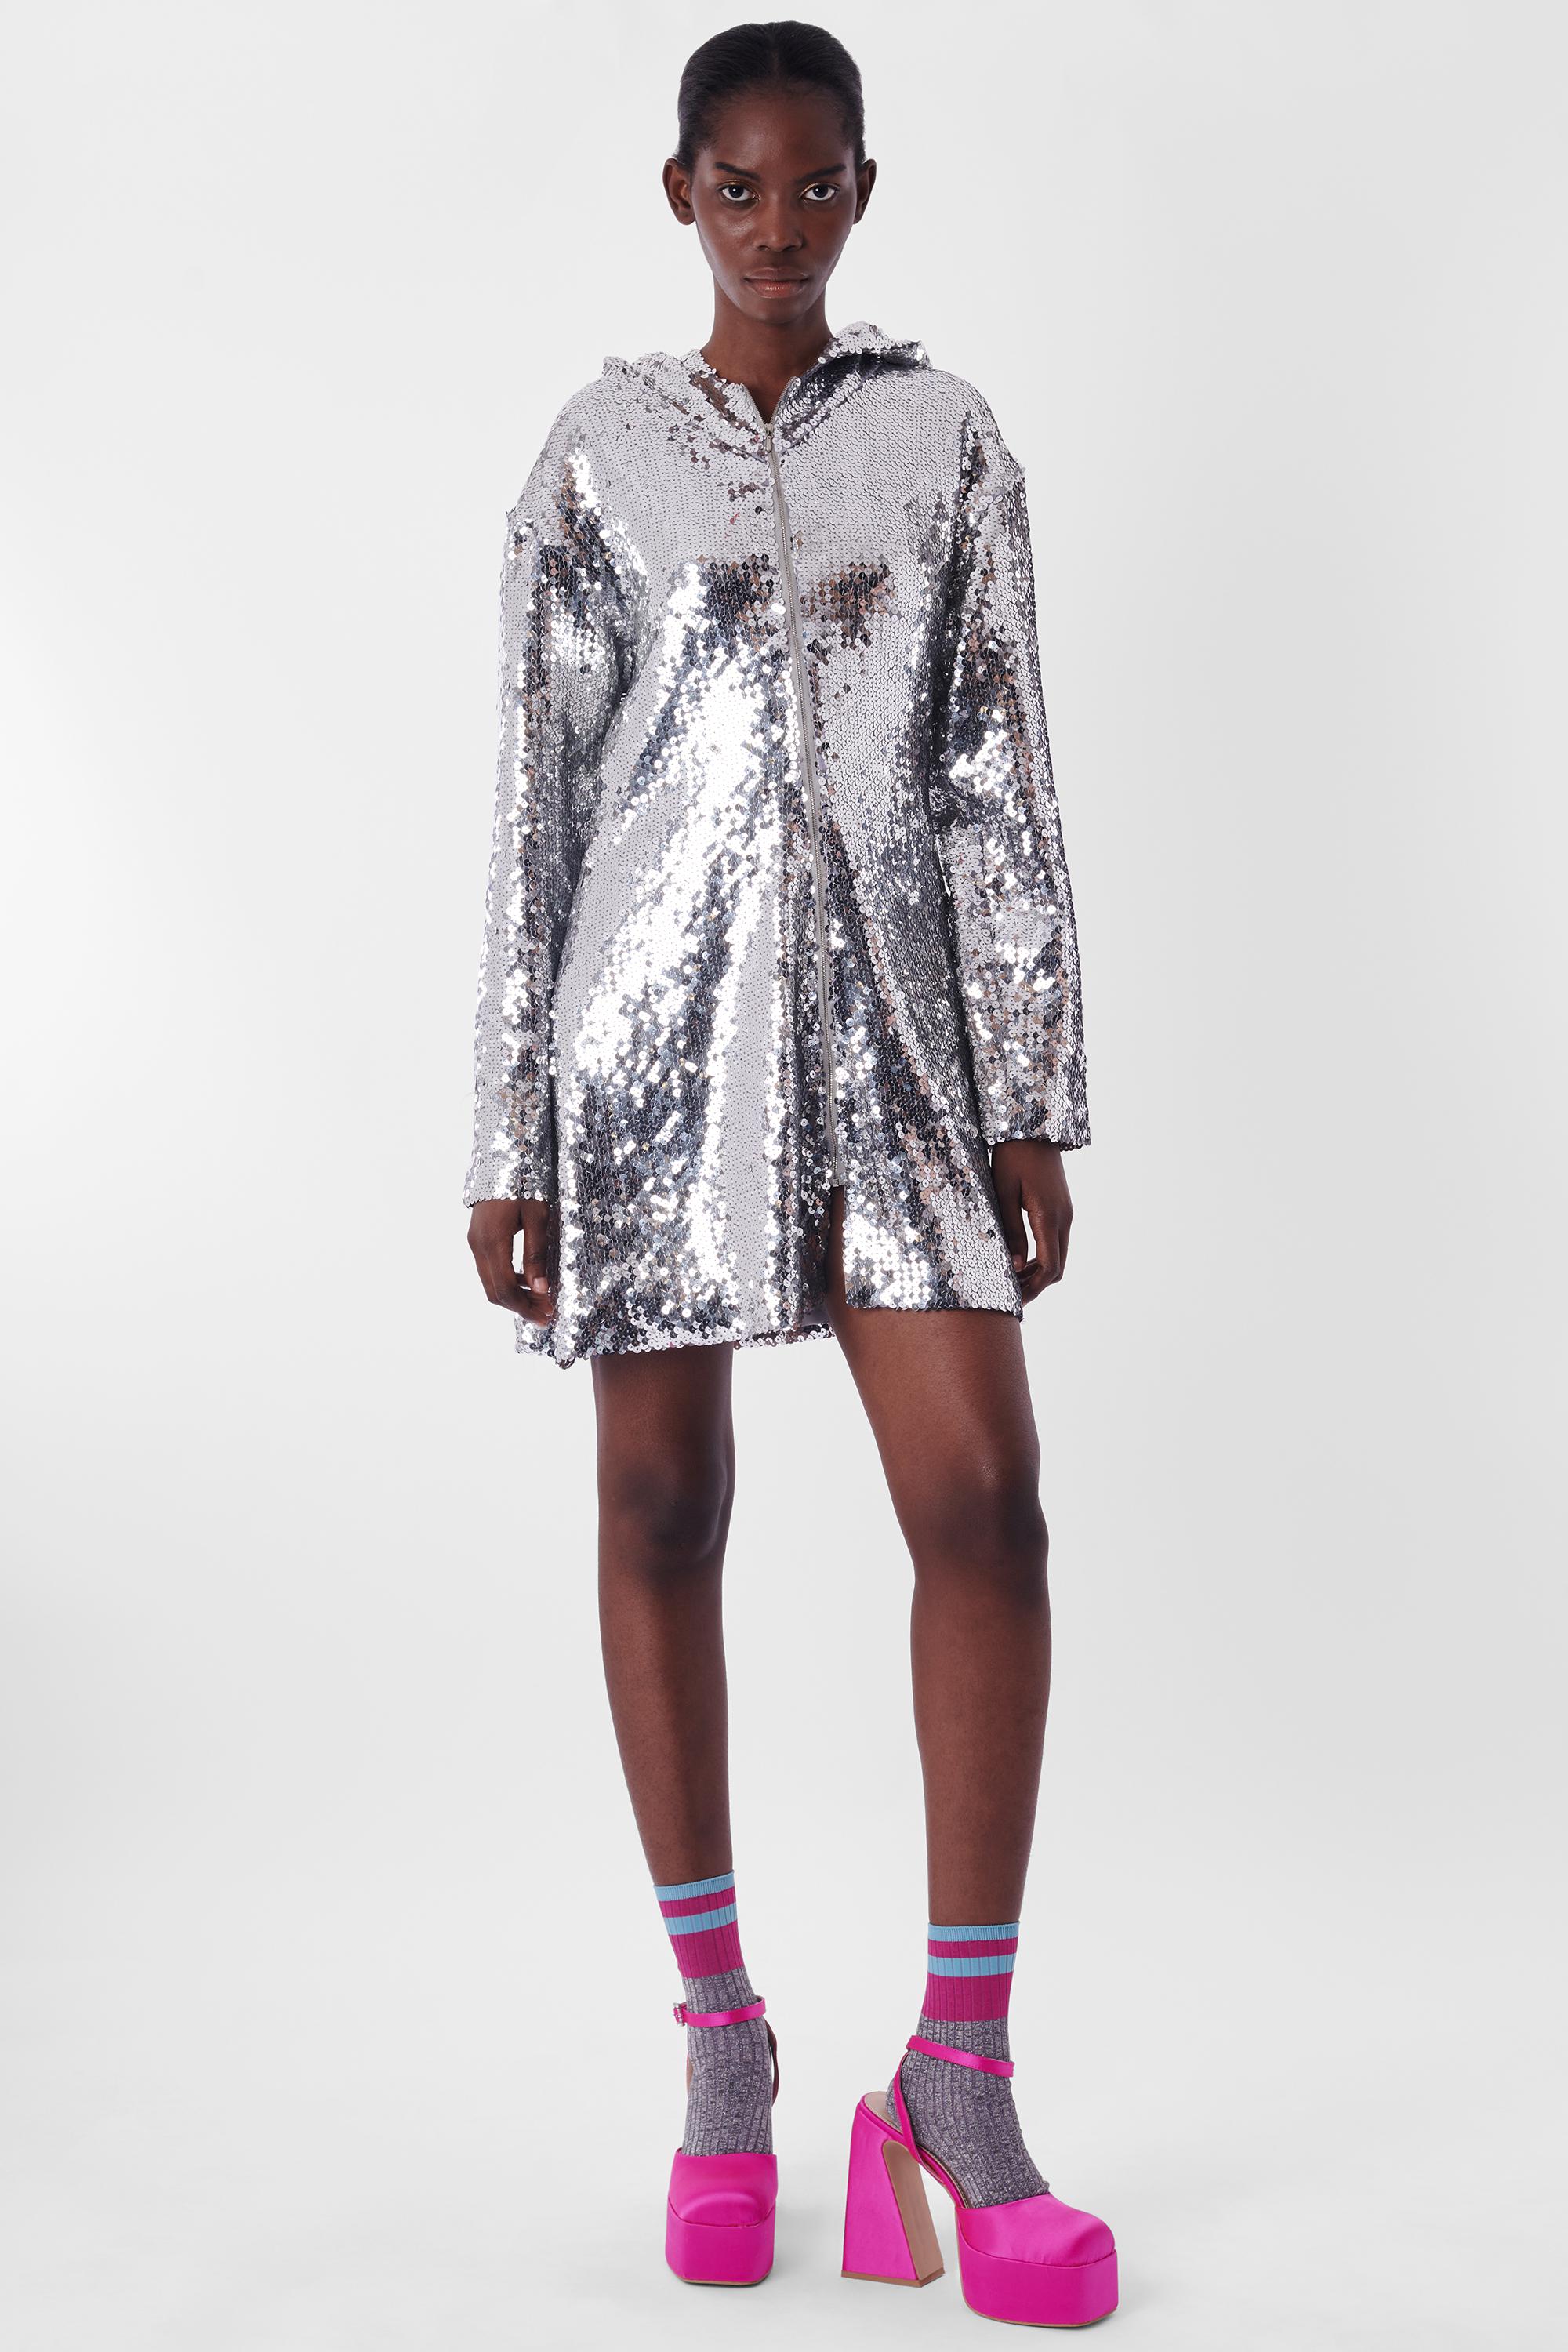 We are excited to present this rare Helmut Lang Vintage 1980's Sequin Hooded Dress. features zipper down front, long sleeves, hood and mini length. In excellent vintage condition. Authenticity guaranteed.

Label size: N/A
Modern size: UK: 8 to 10 ,